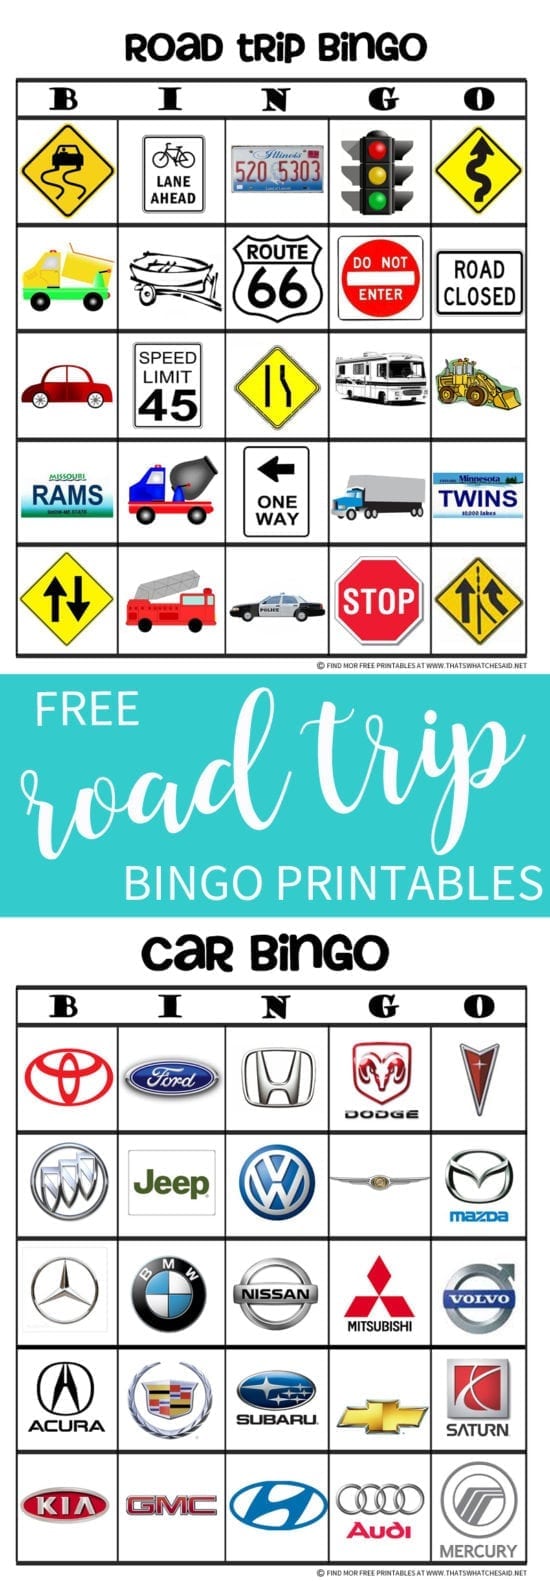 Combine I Spy with Bingo for this fun Road Trip Bingo game! Free Printables included.